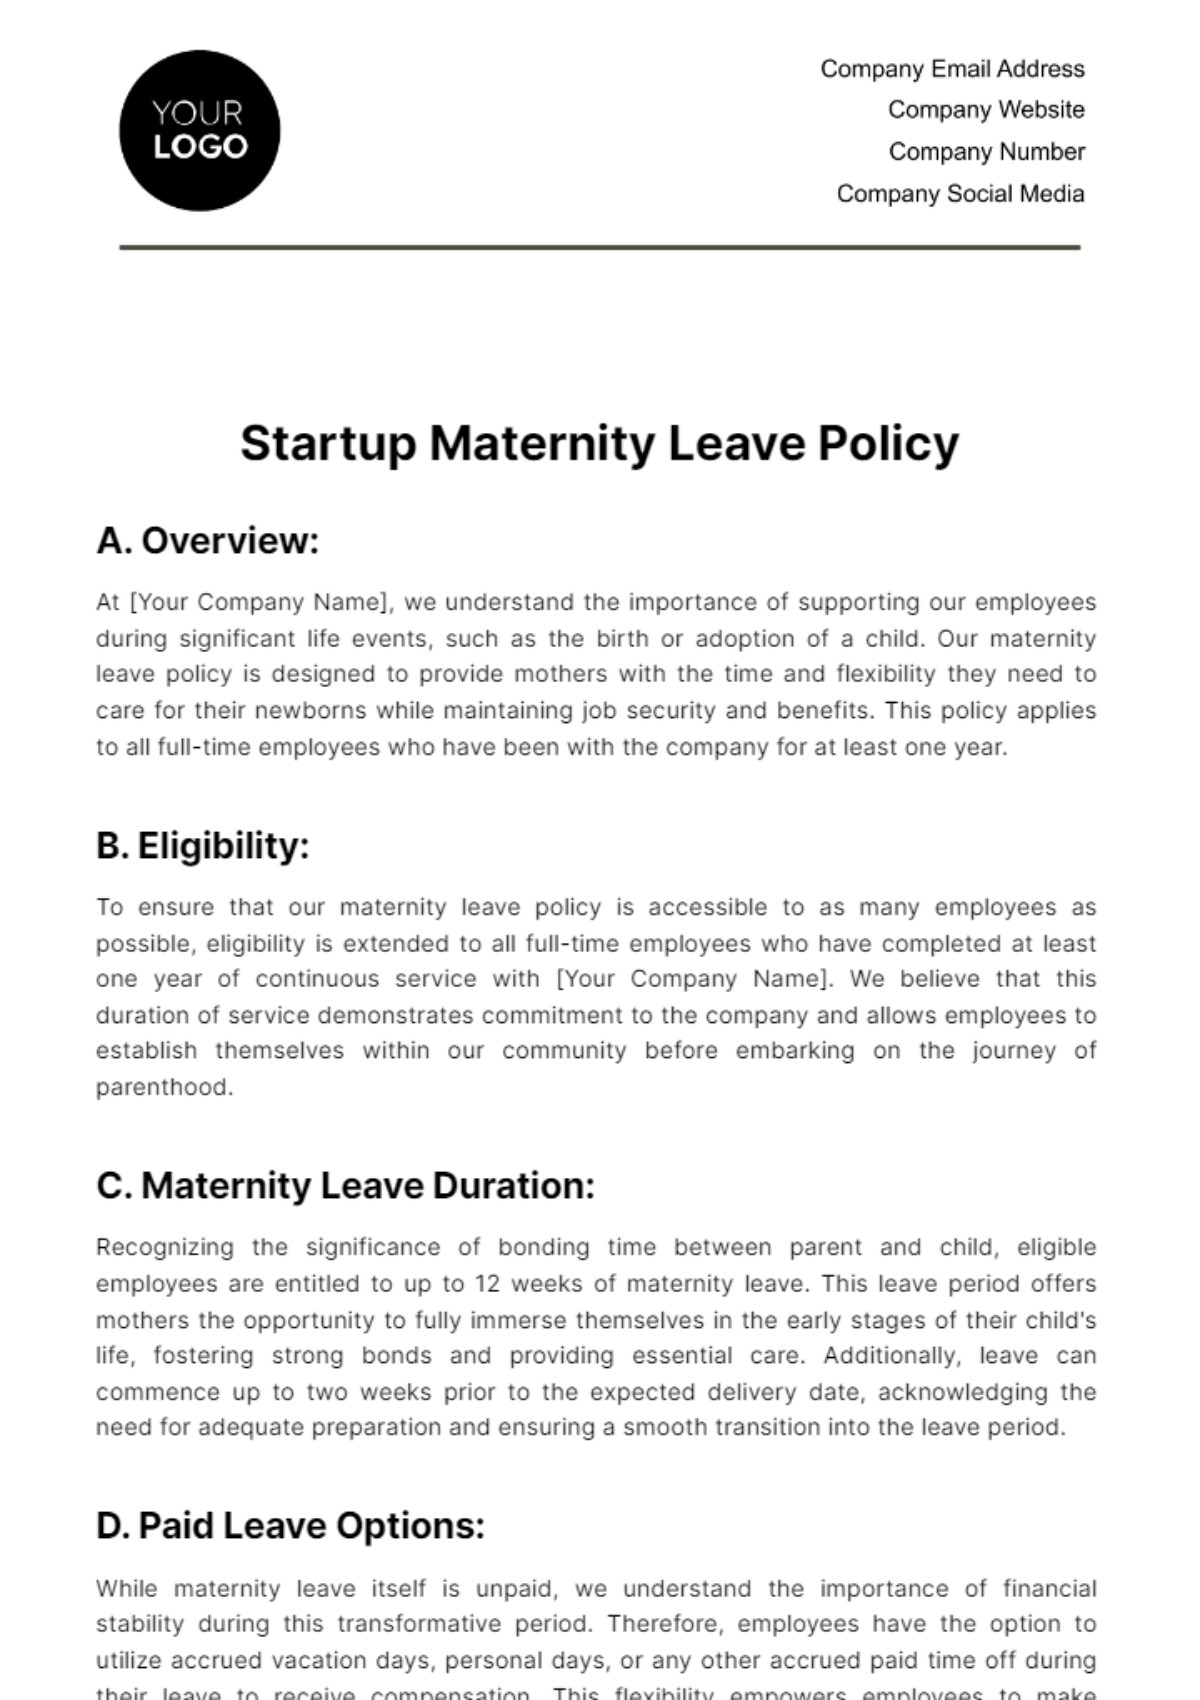 Free Startup Maternity Leave Policy Template